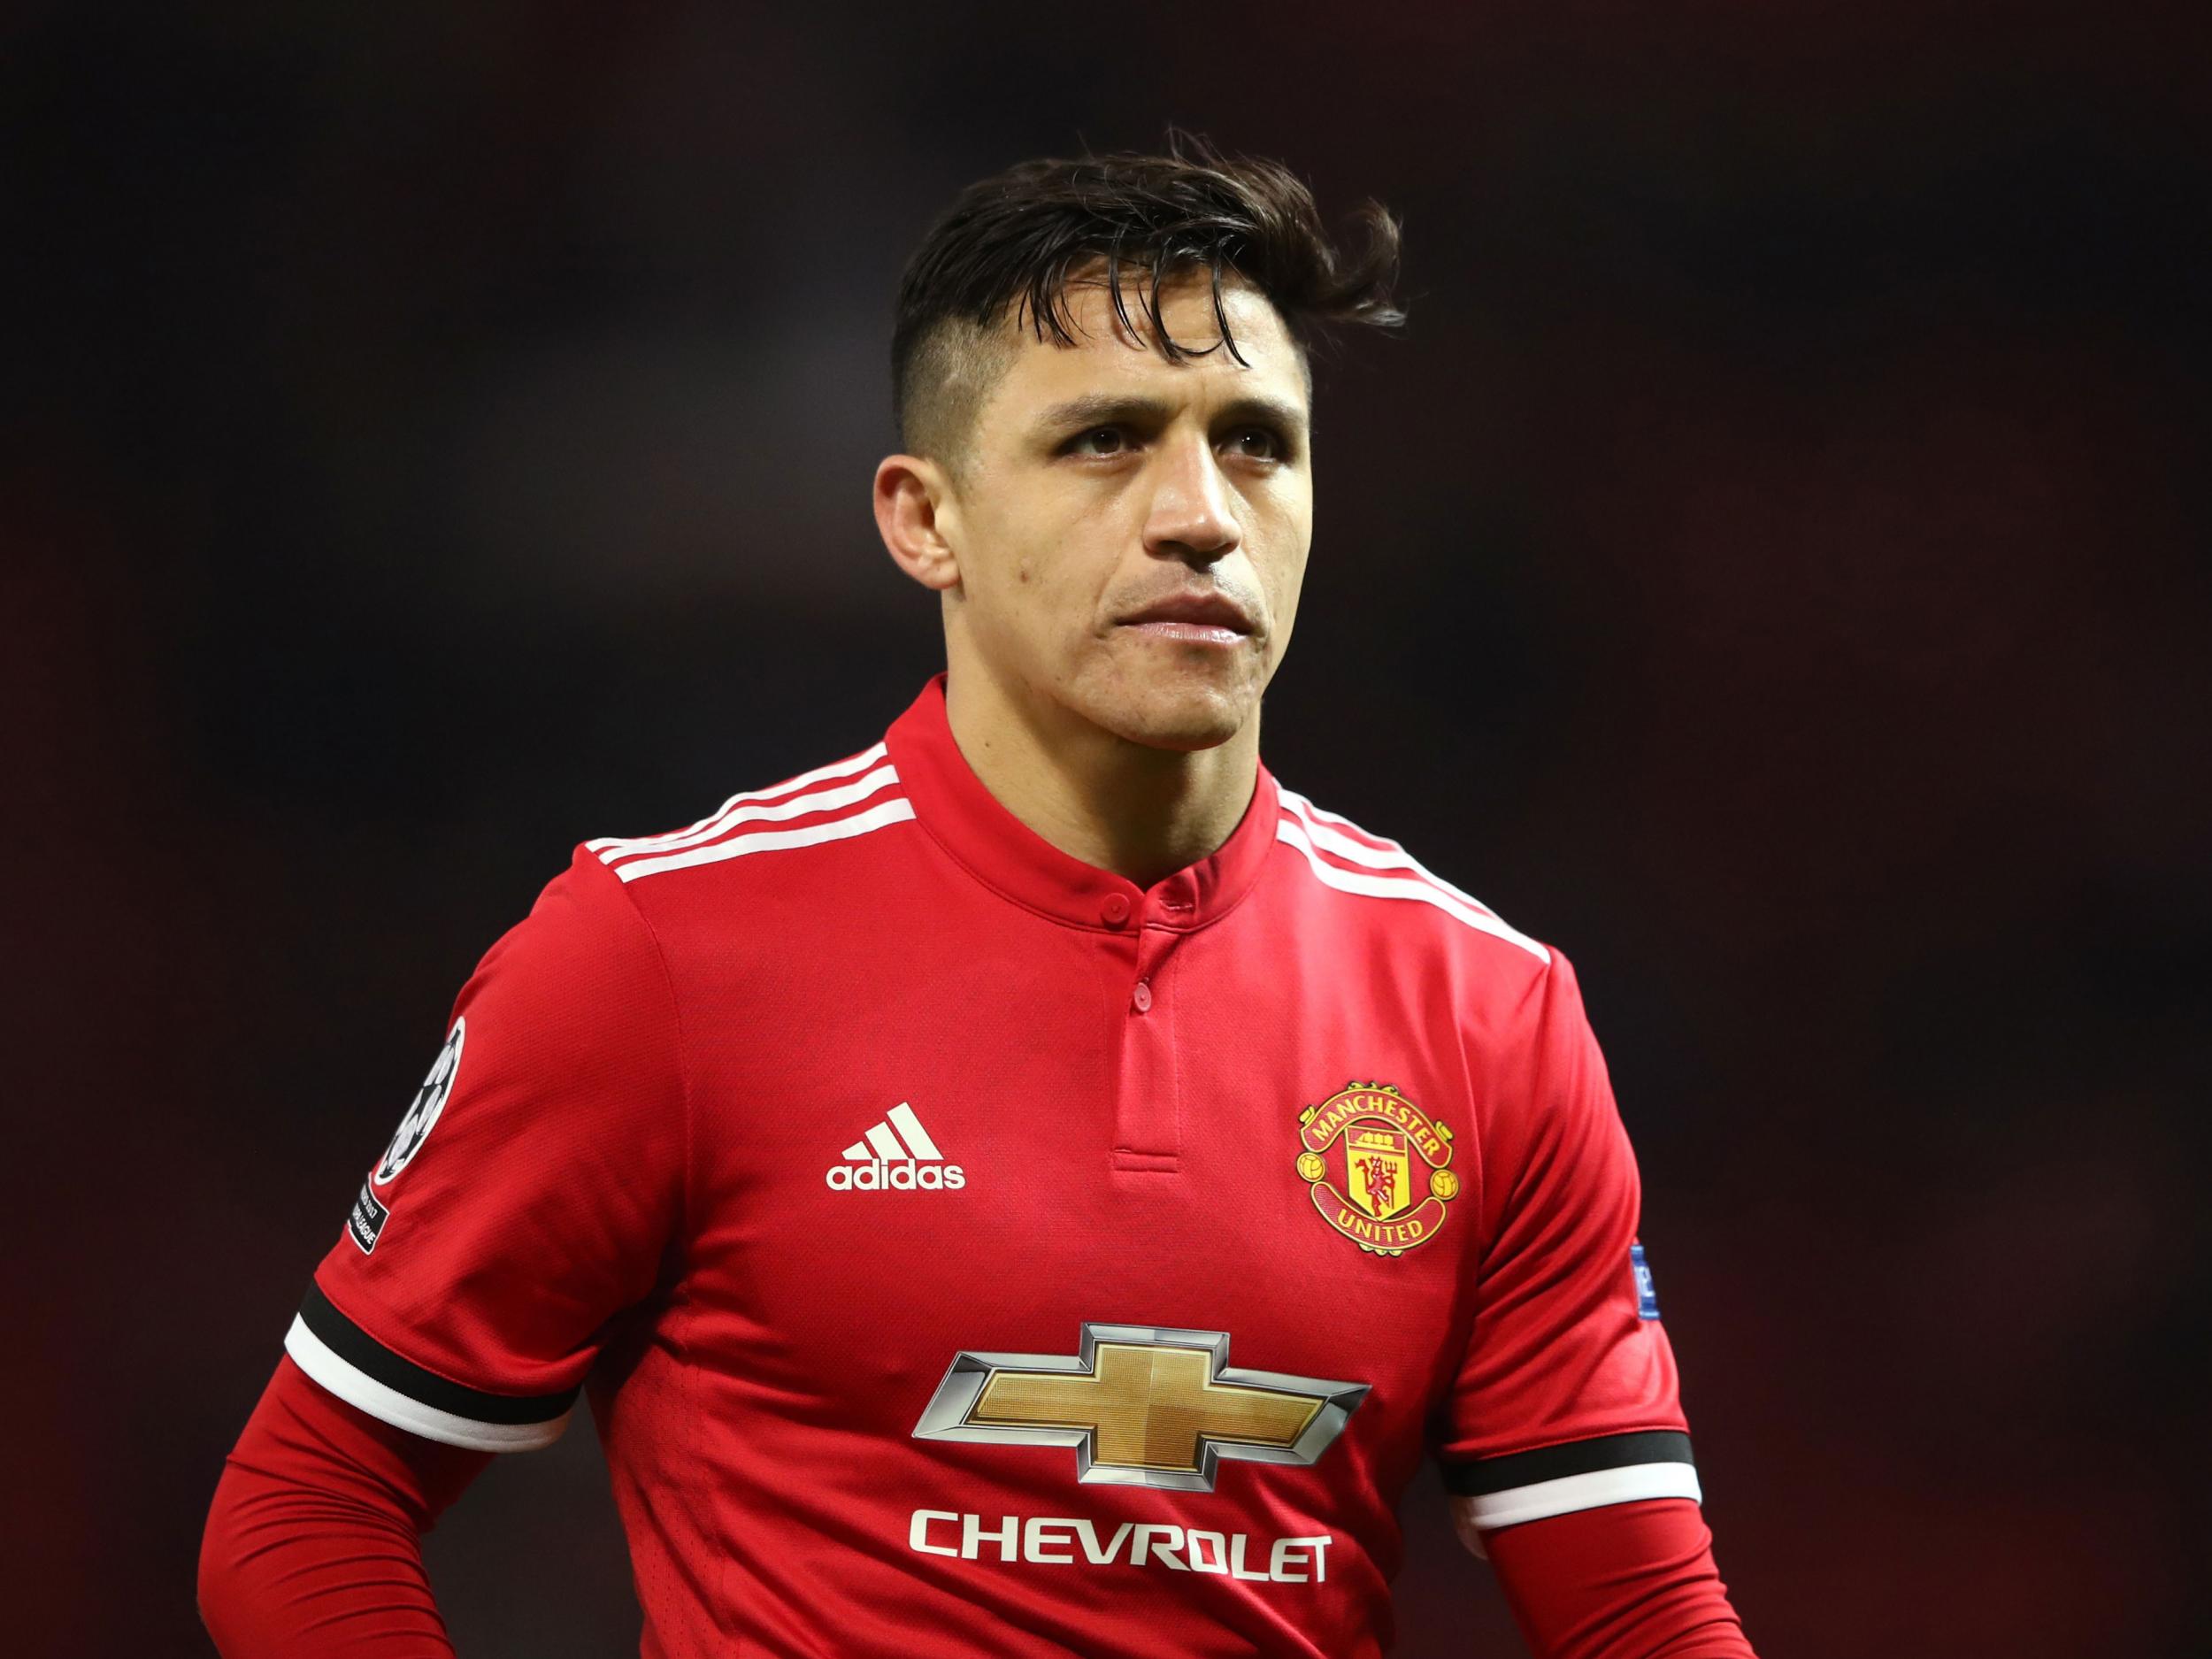 Manchester United S Alexis Sanchez Wants To End Career